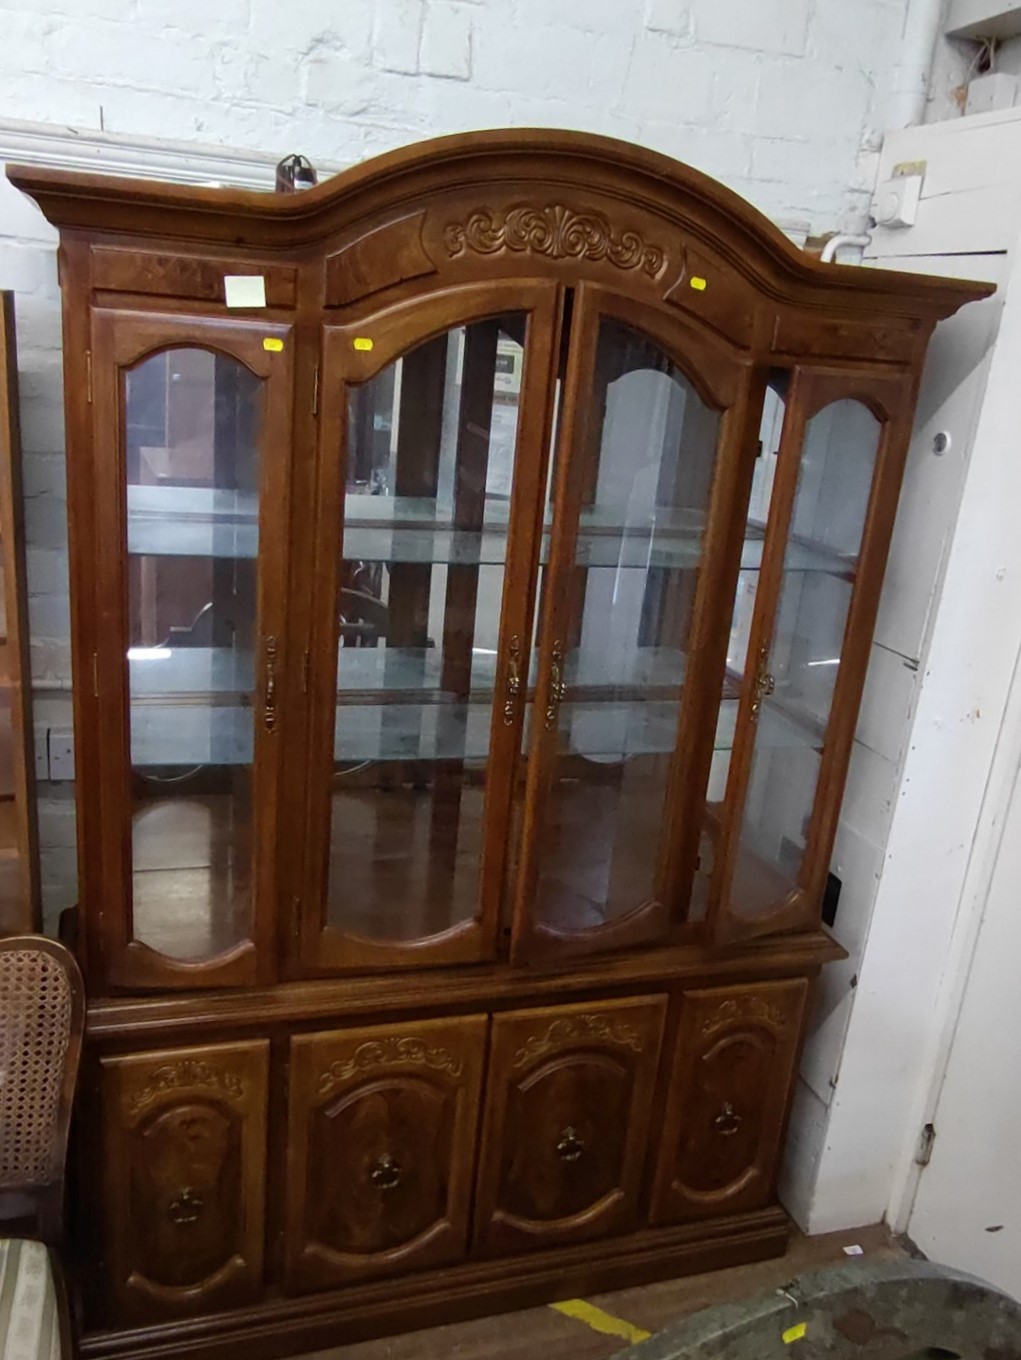 A large display cabinet. 20th century. With a pair of doors enclosing glass shelves.